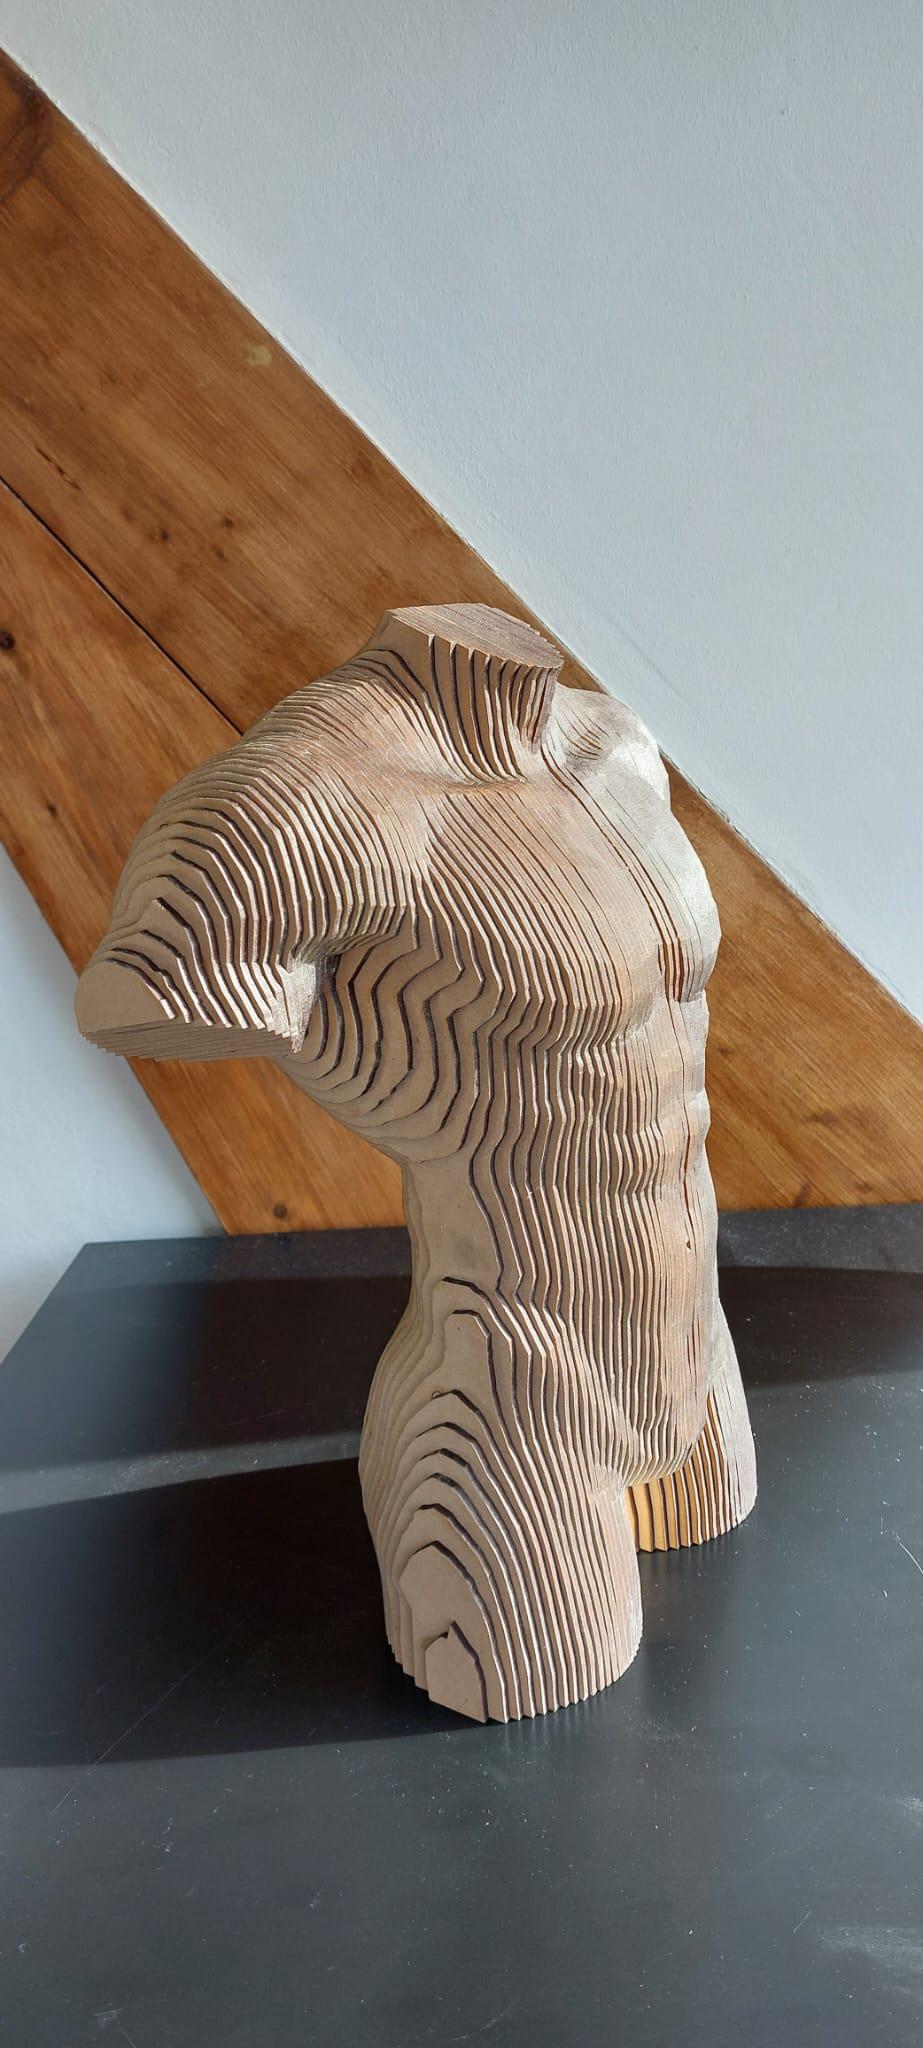 The design of the male torso must be meticulously planned, paying close attention to anatomical details. The layers of MDF should be cut and stacked to accurately resemble the curves and contours of the human body. Each layer of MDF needs to be cut